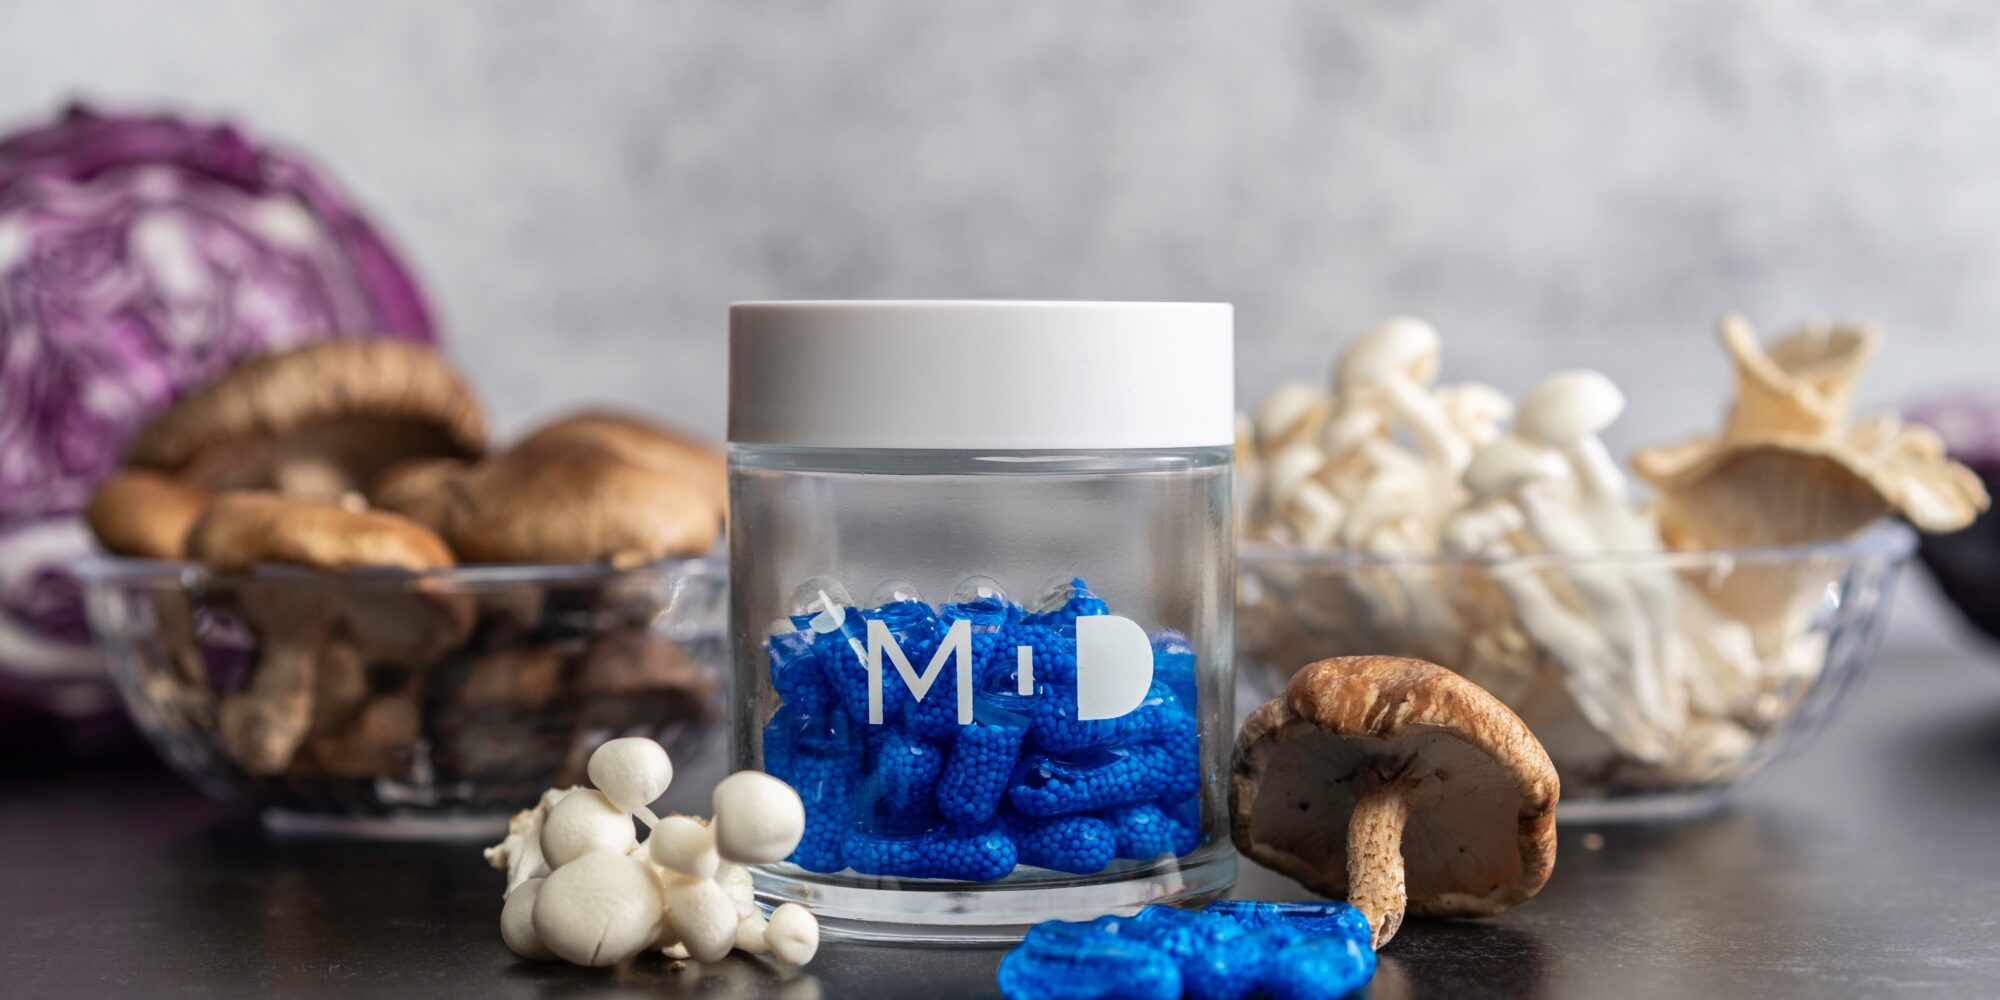 A New Crop Of Wellness Startups Is Joining The Mushroom Rush